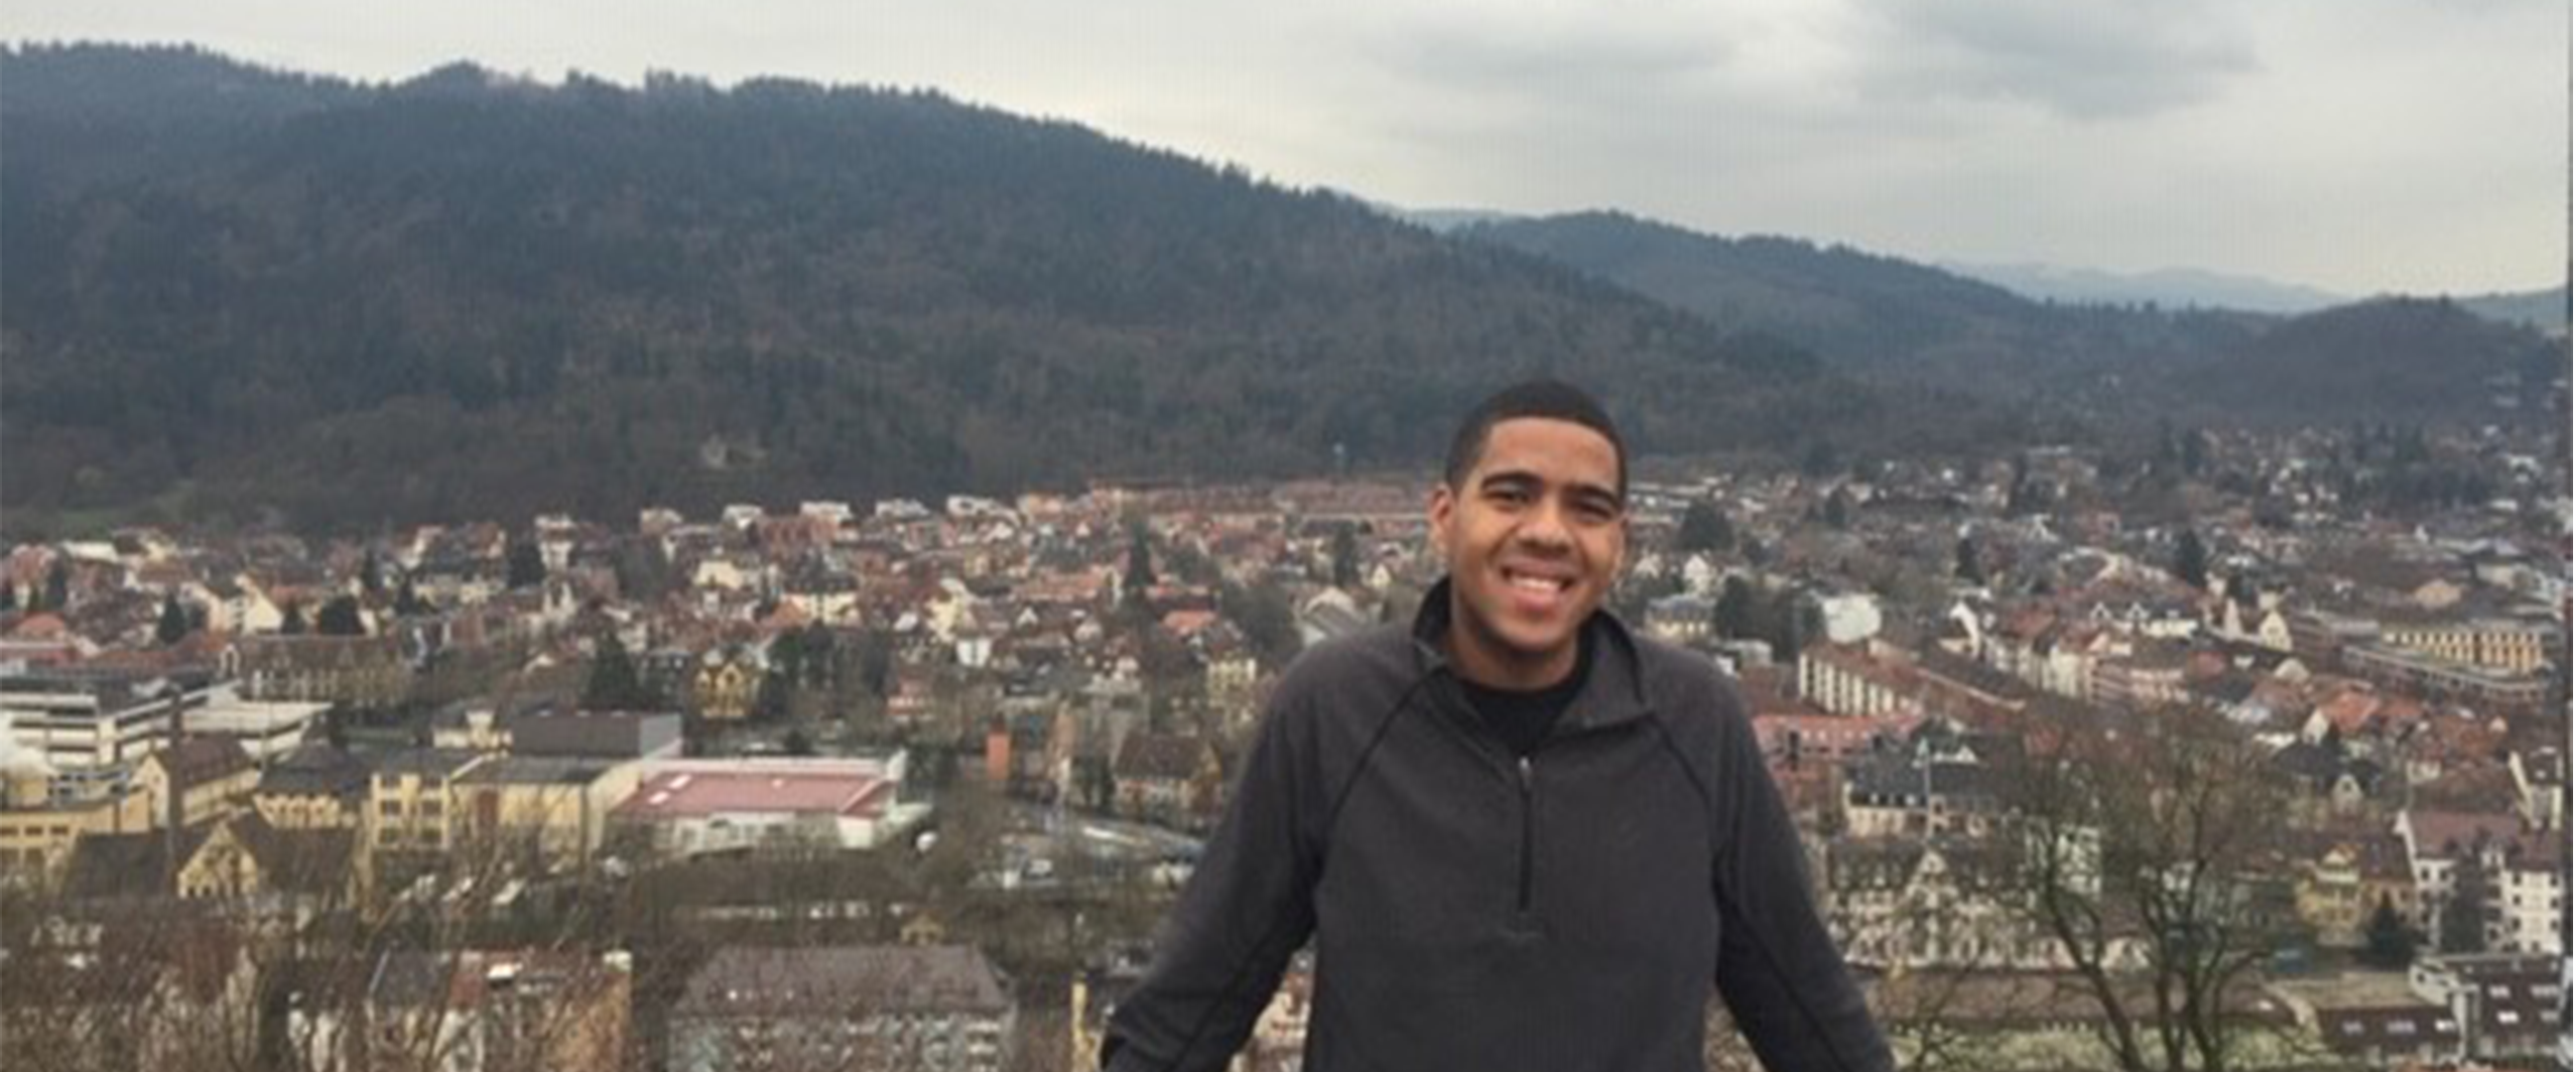 Marcus posing in Germany, with mountains in the background 